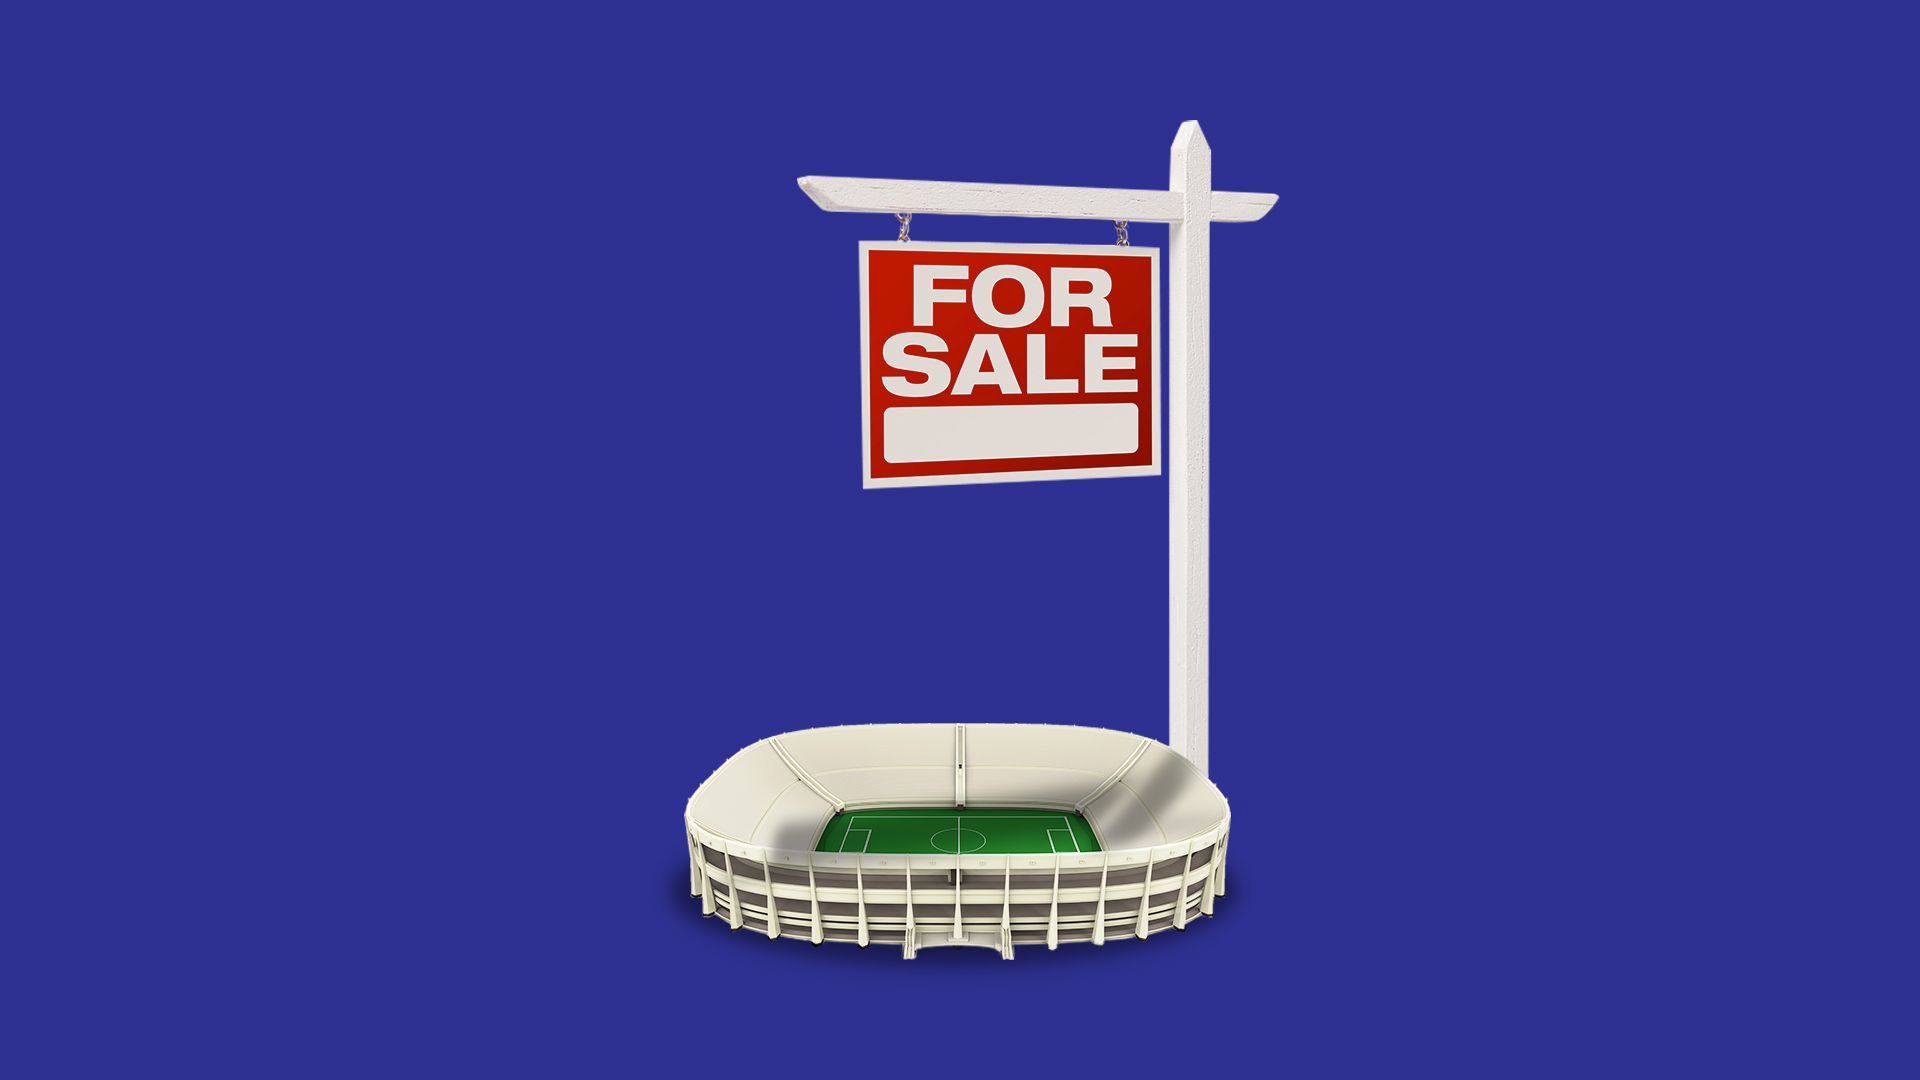 An illustration of a stadium with an oversized for sale sign on it.